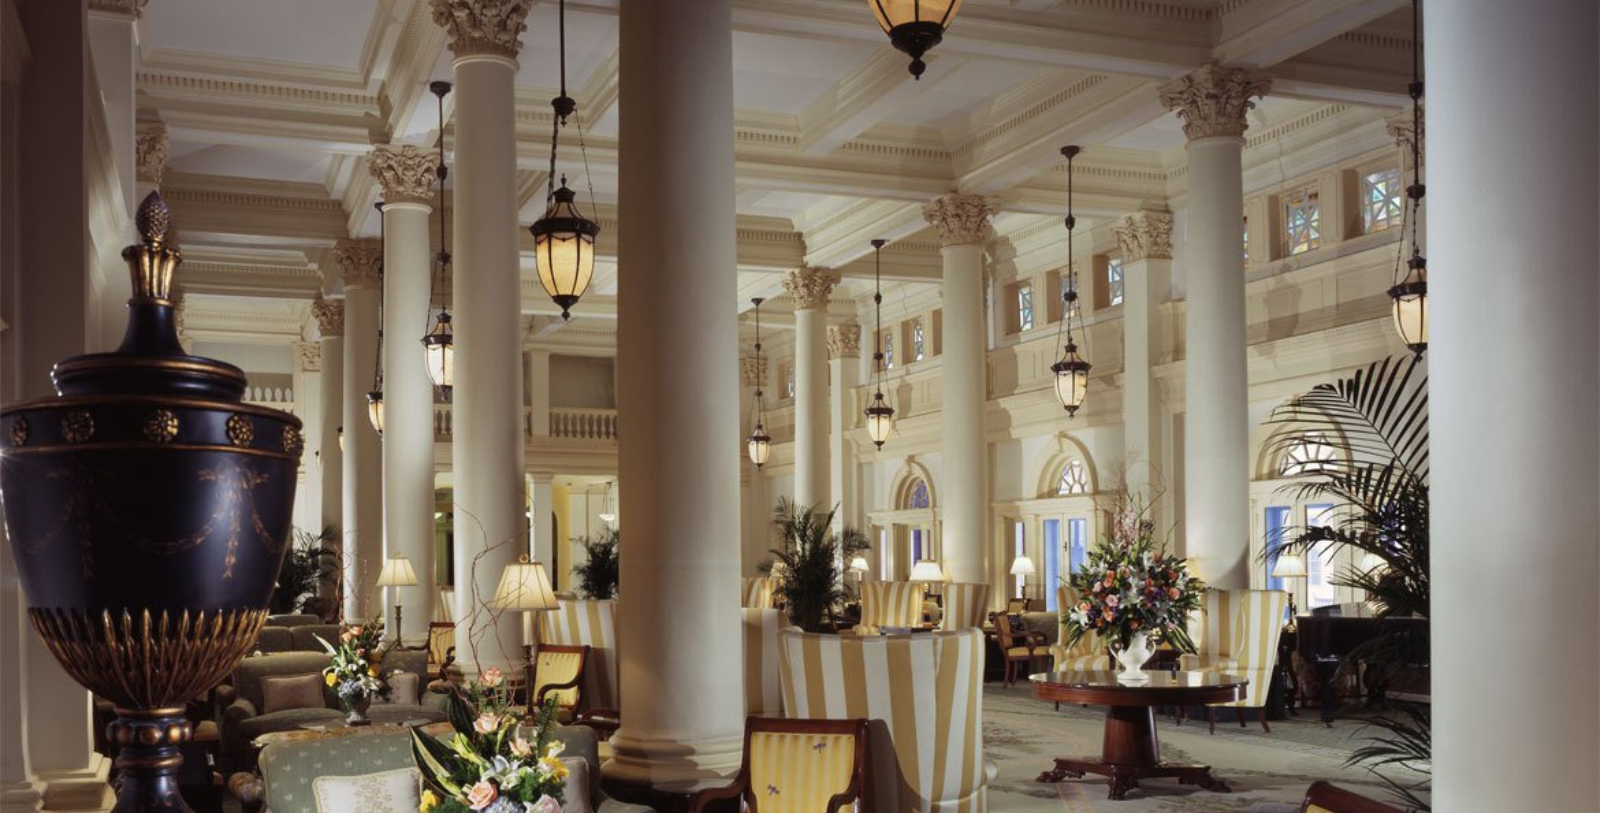 Discover the Great Hall at The Omni Homestead Resort.